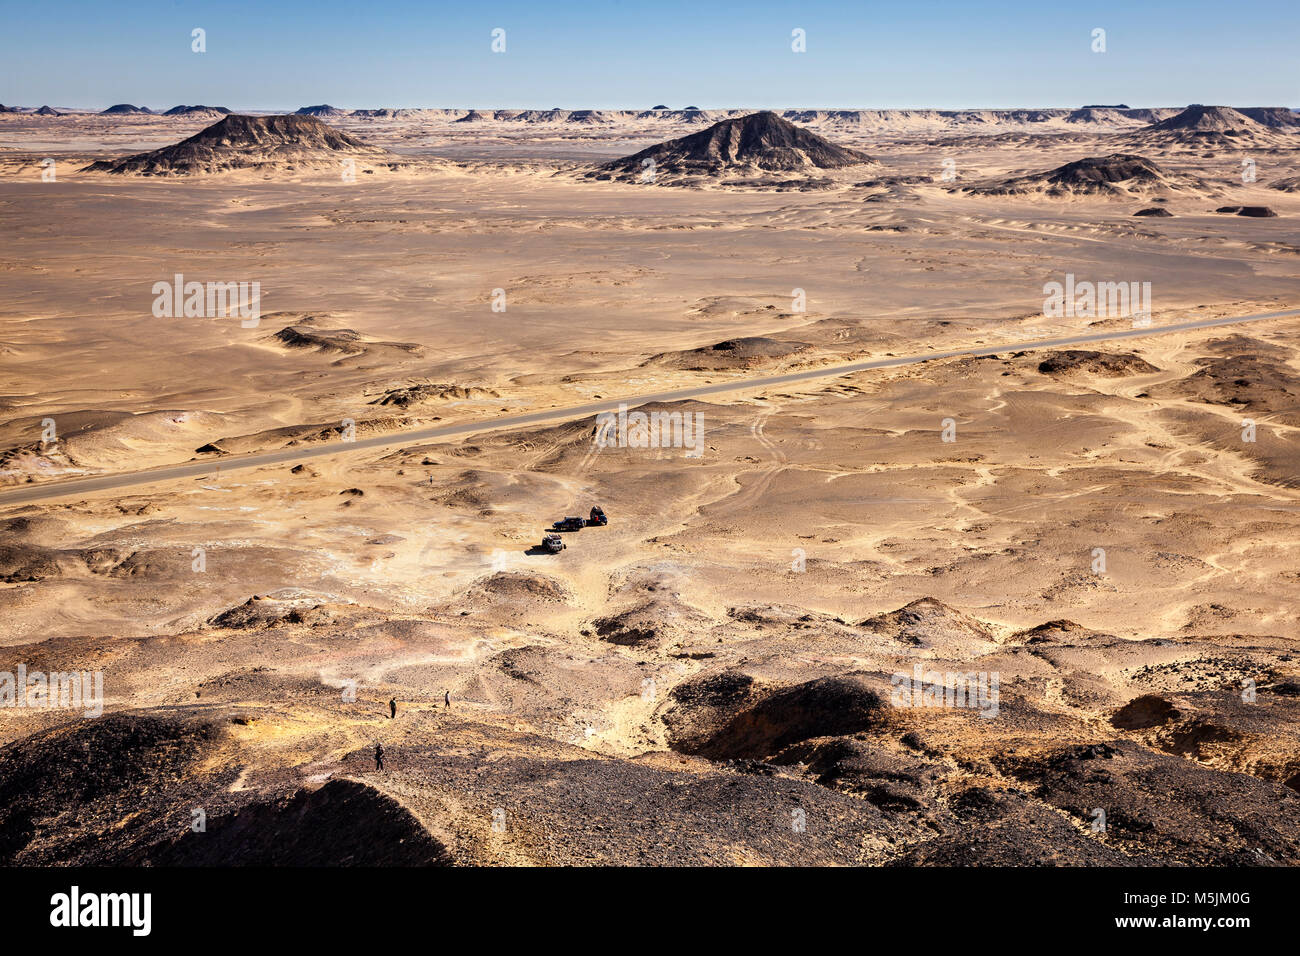 The black desert is situated in the Western Desert region, it is an uninhabited area due to the dryness of the desert plains. Stock Photo